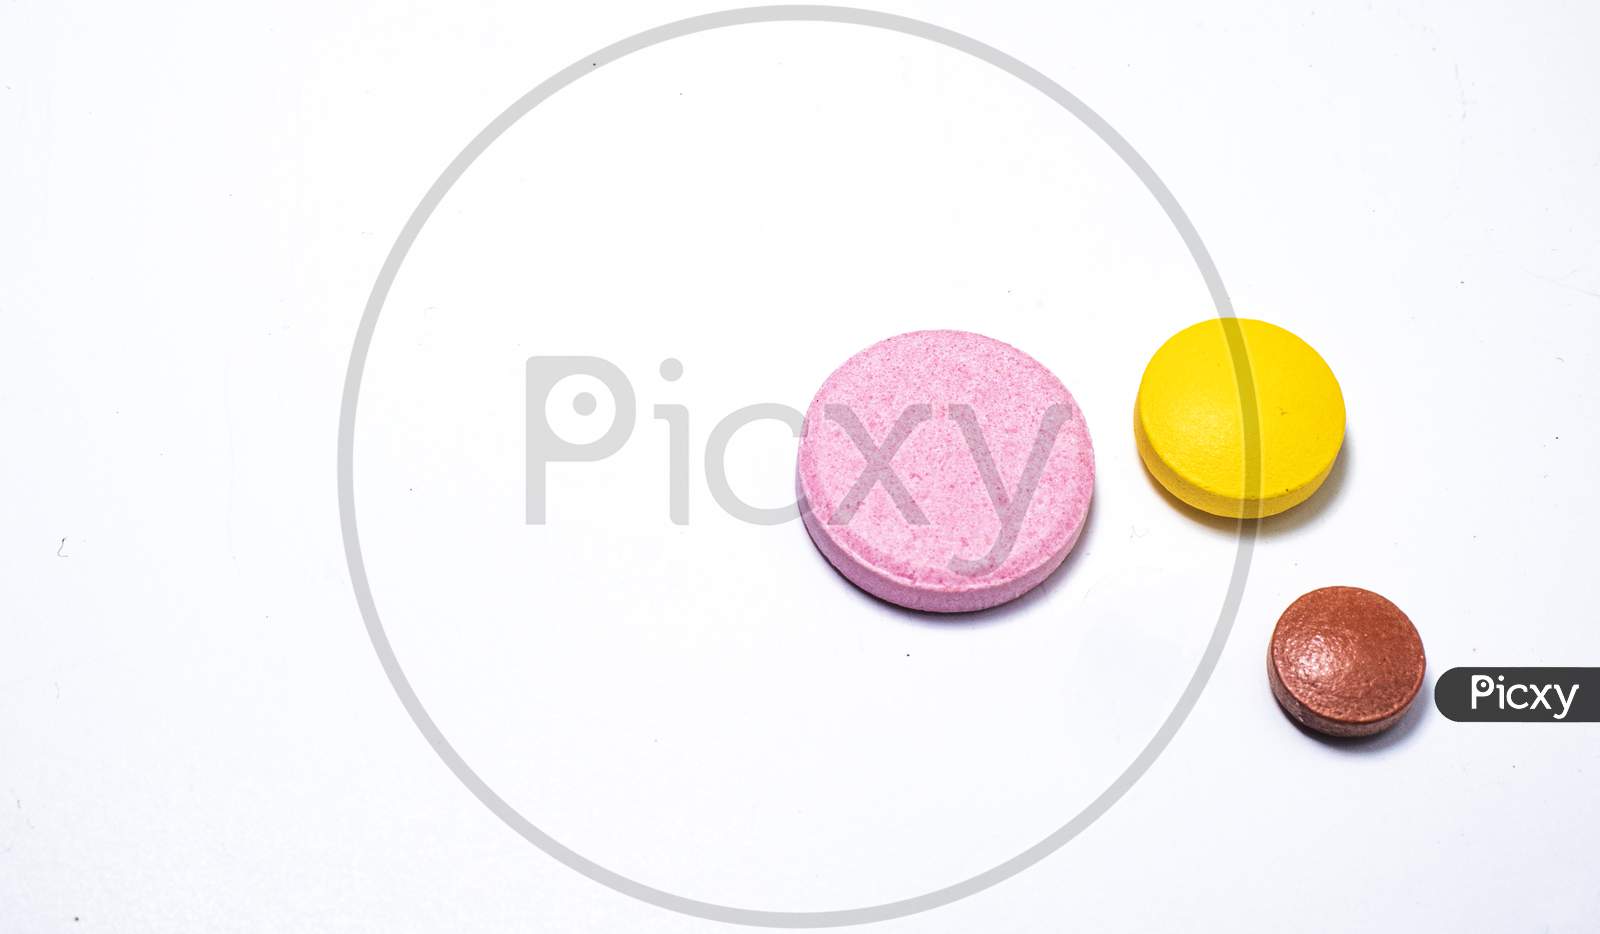 One White One Yellow And One Brown Pill On White Background.